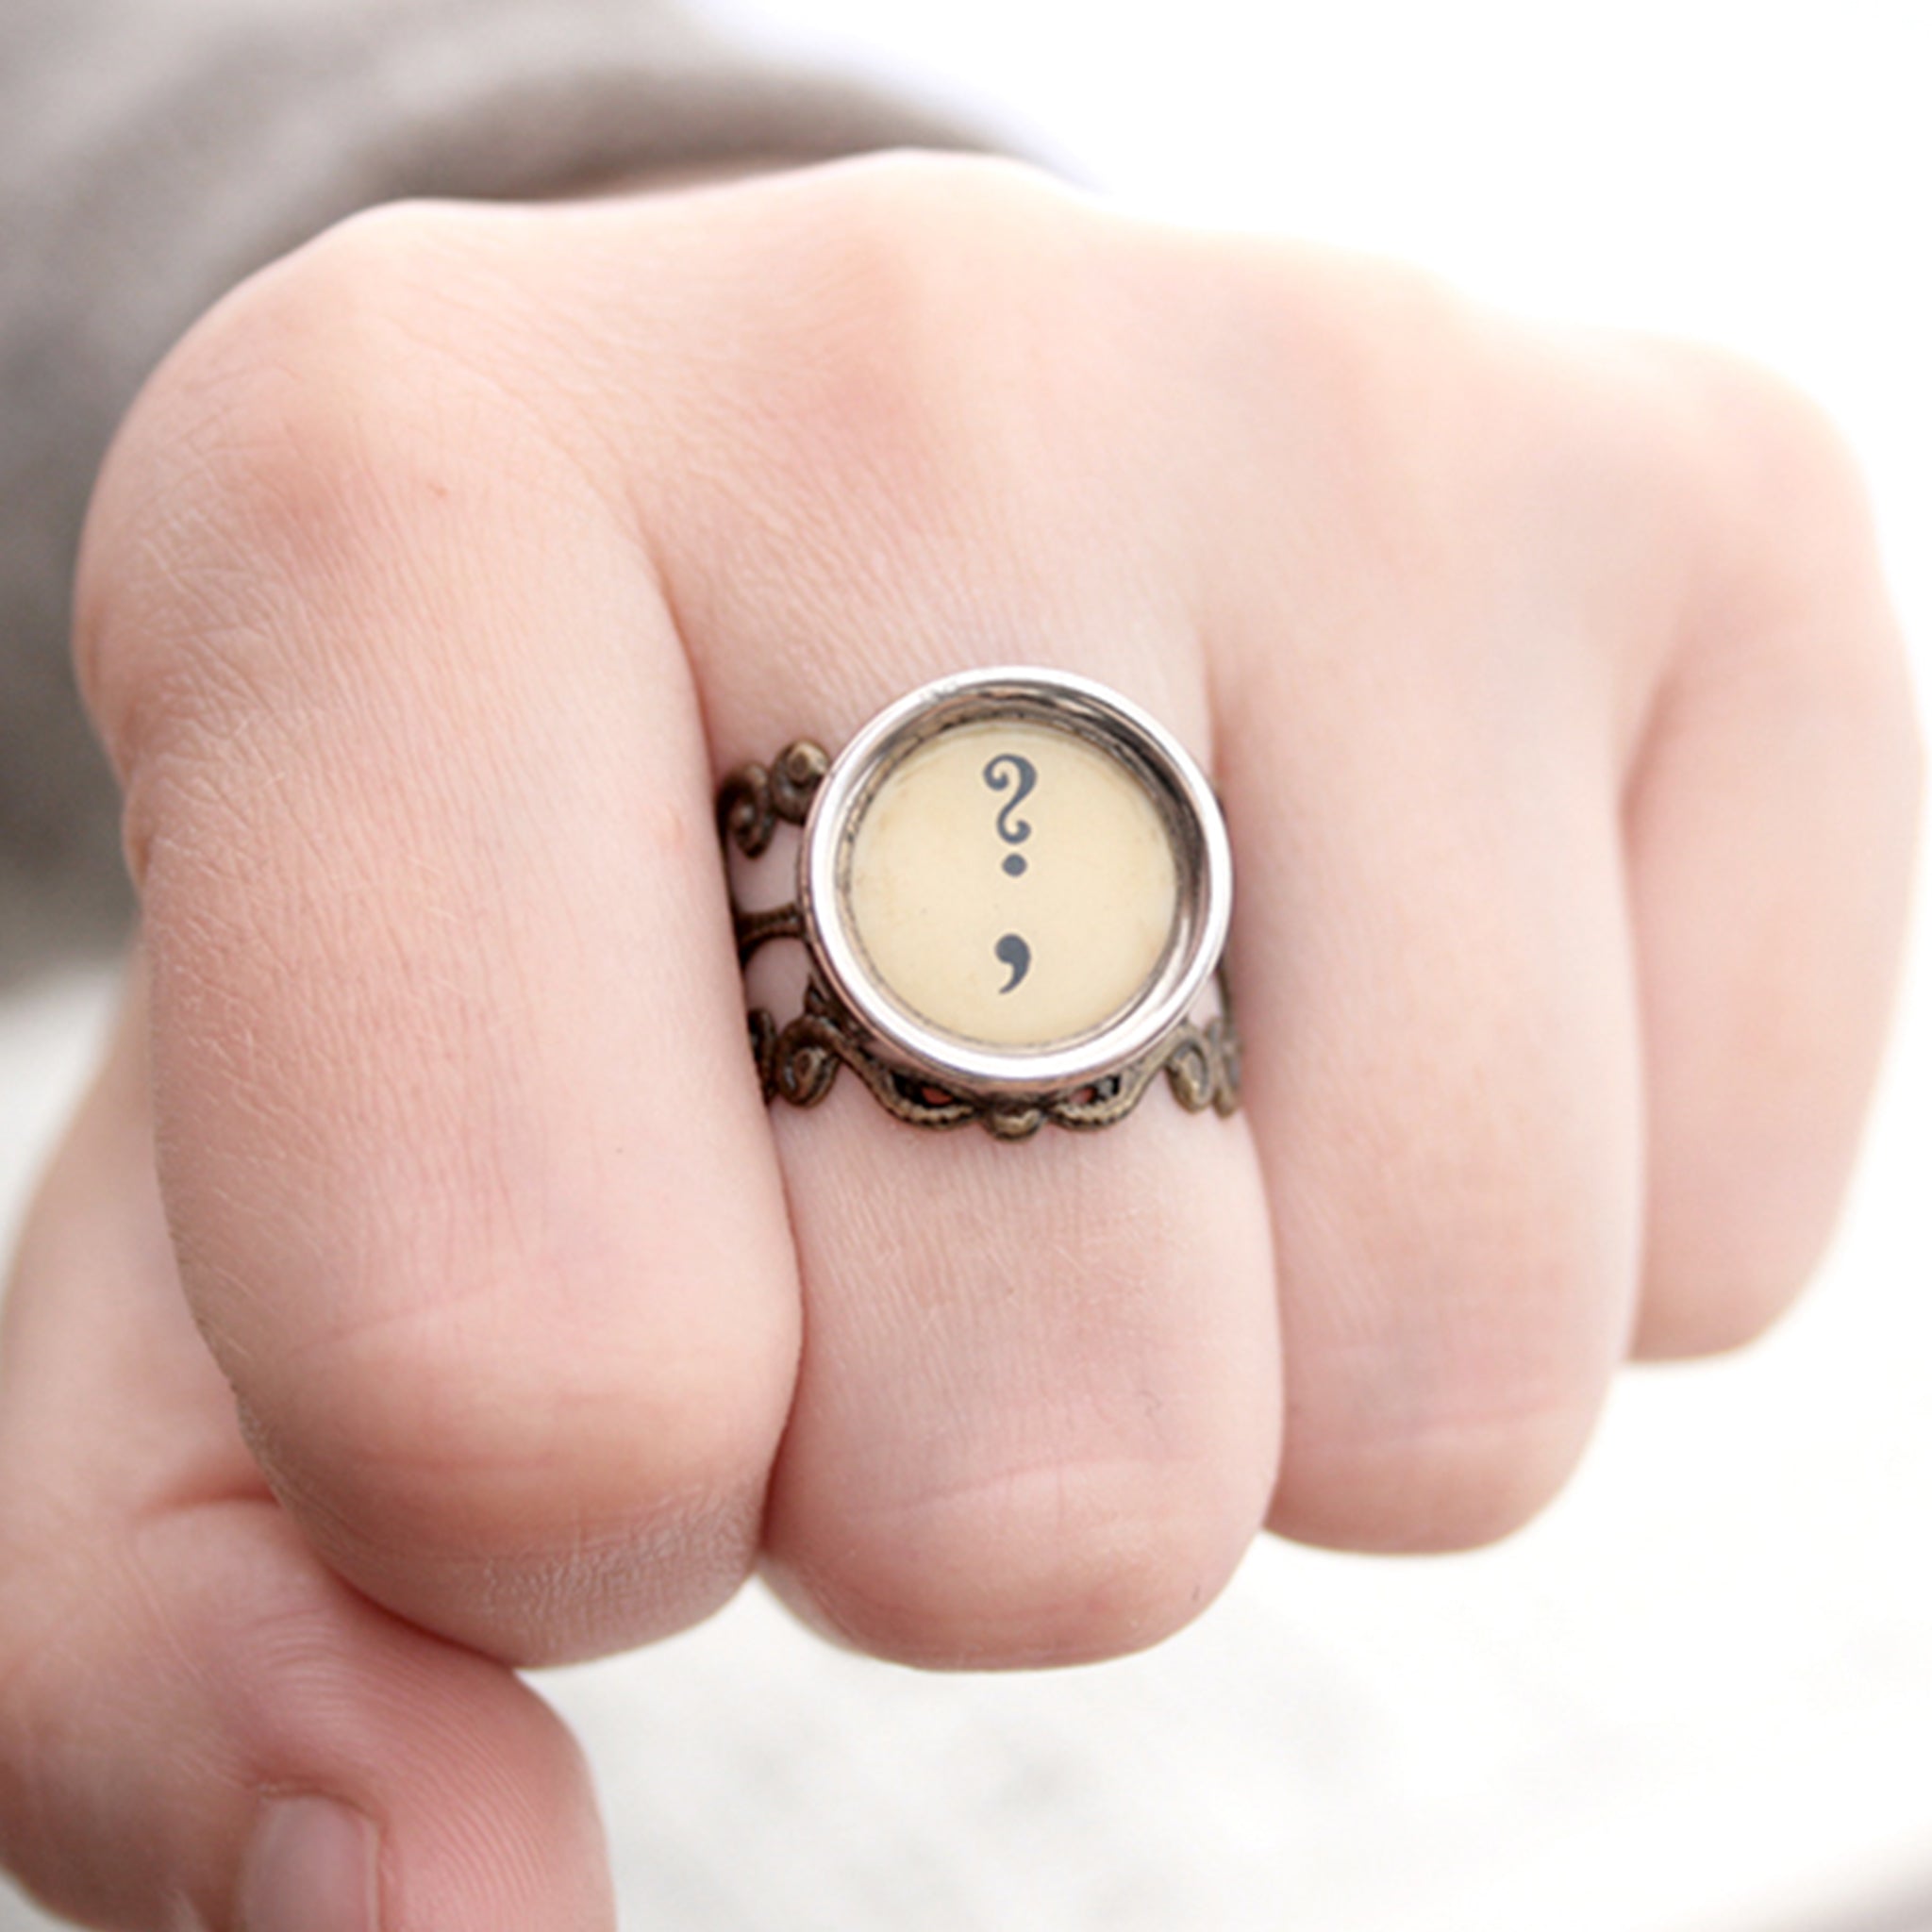 Ring with question mark and comma made of  typewriter key in ivory color worn on hand